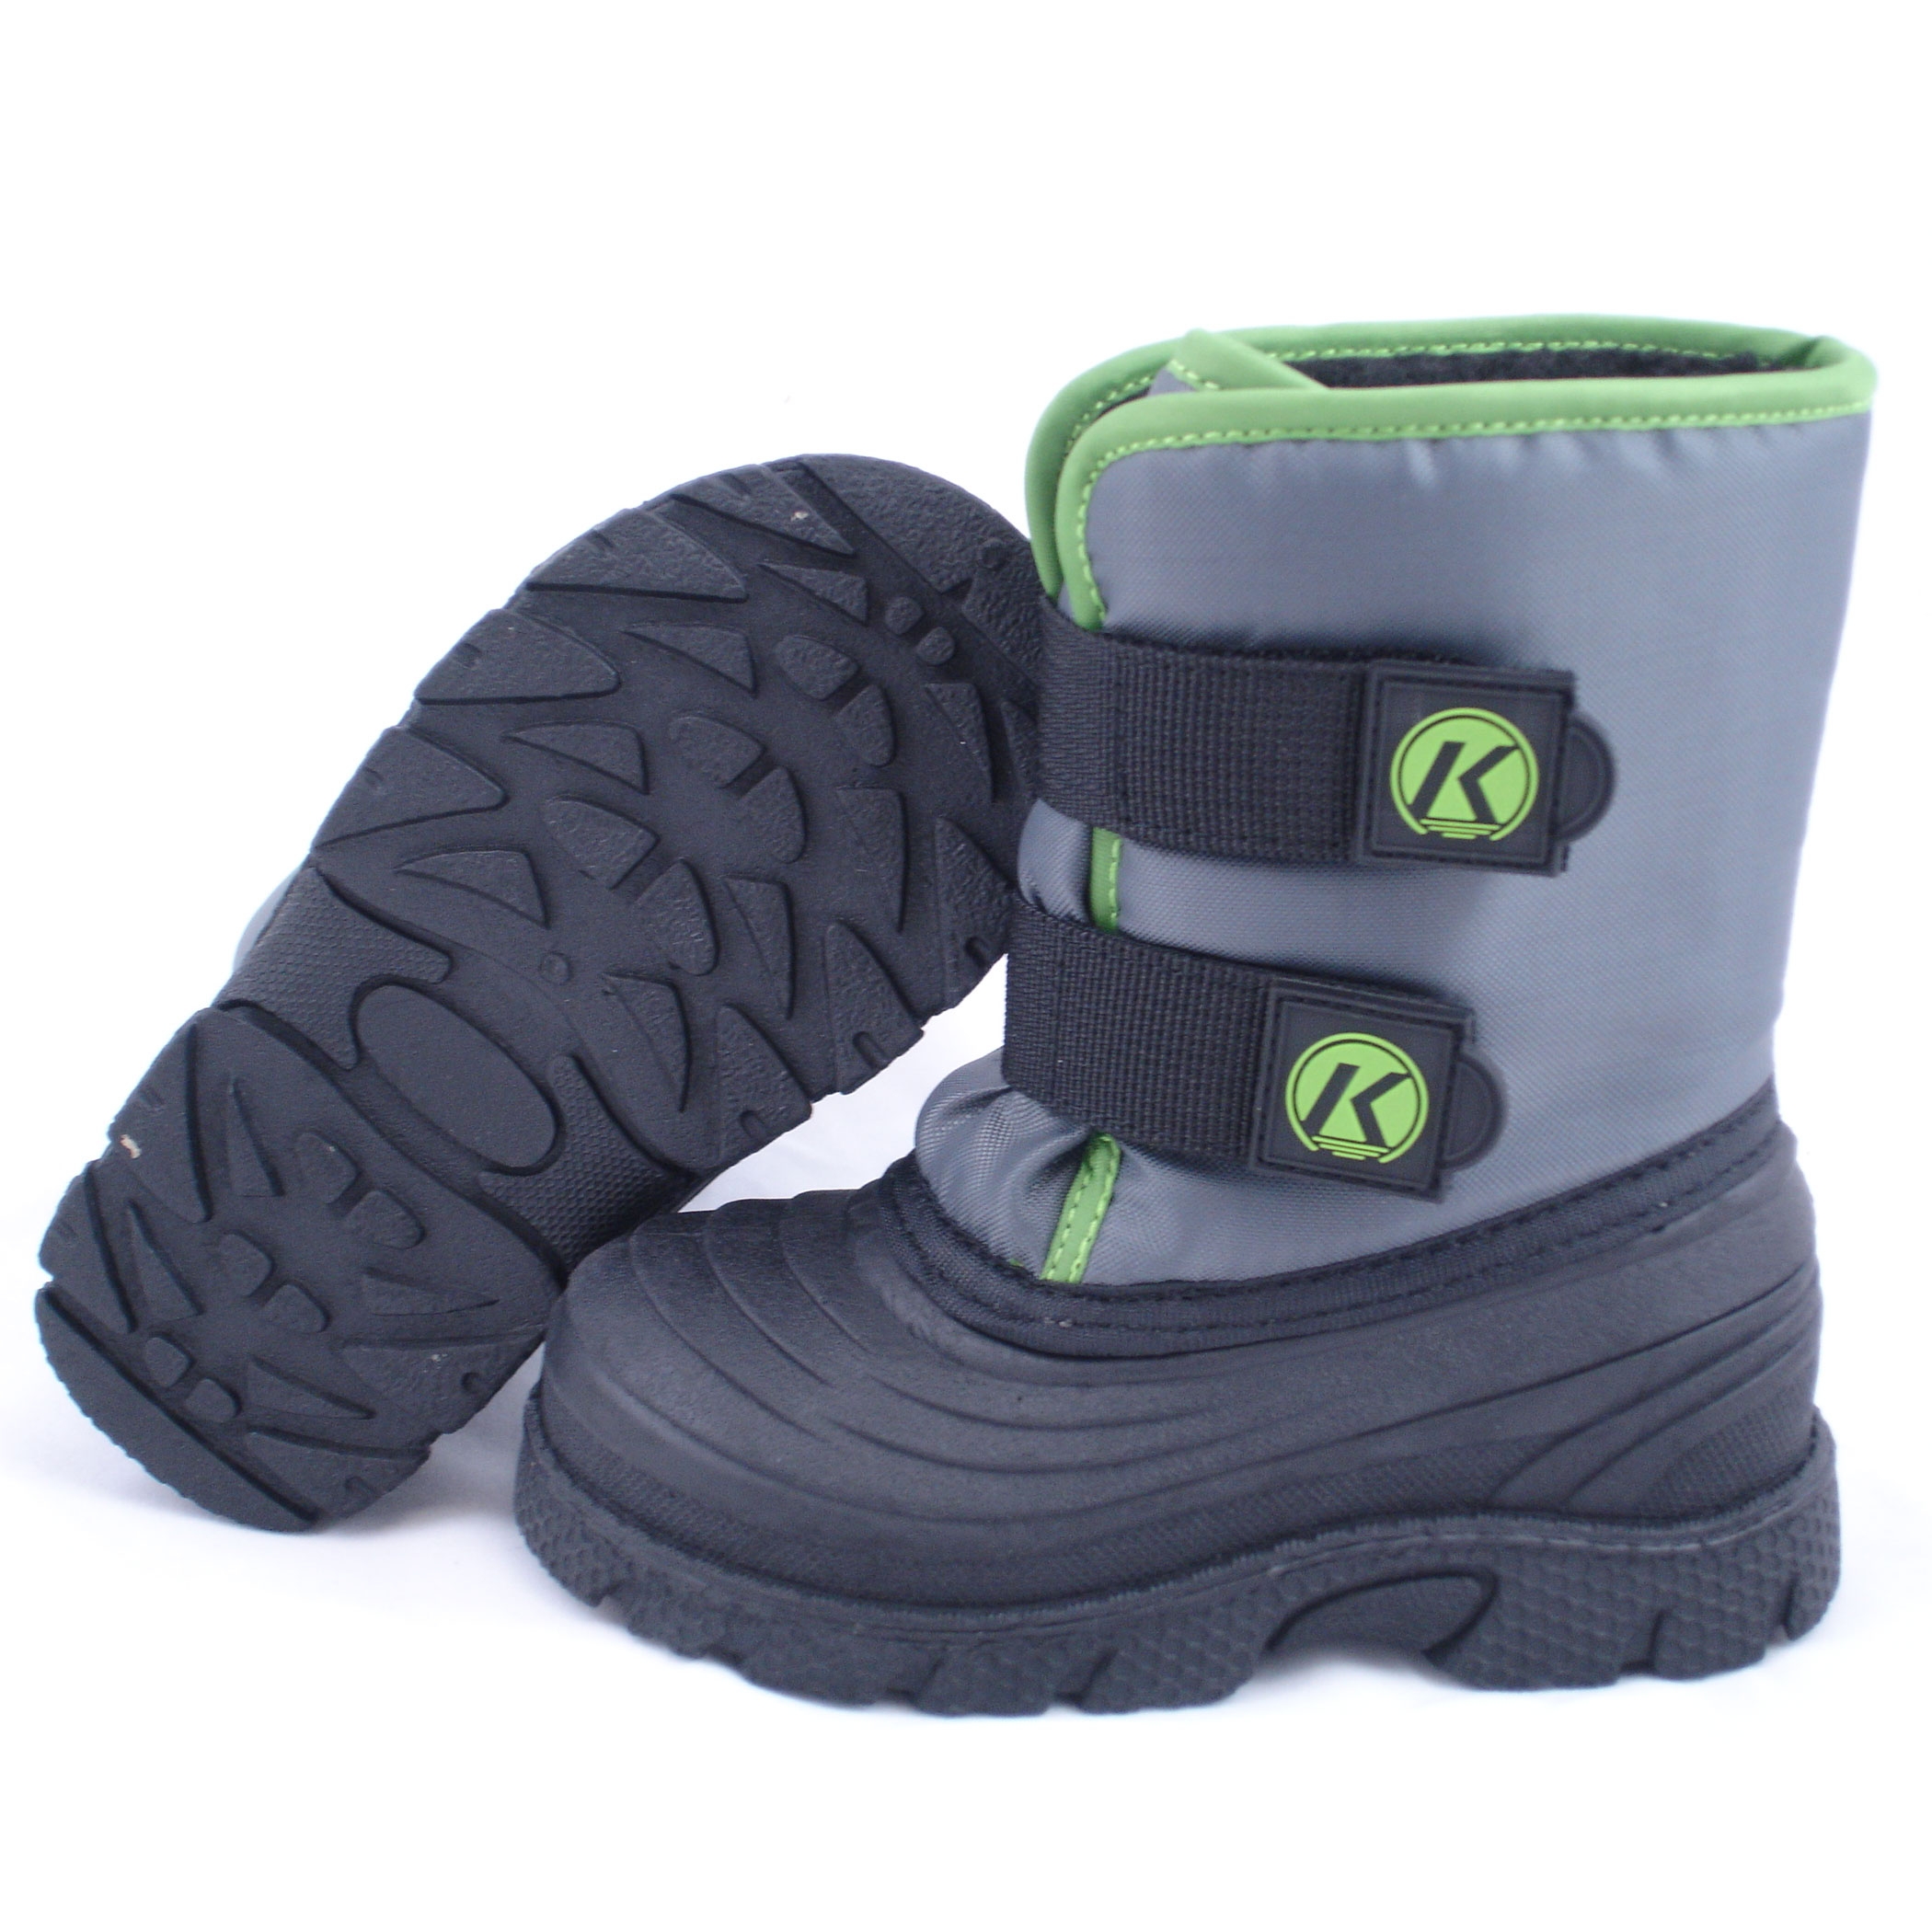 winter boots clipart - photo #6